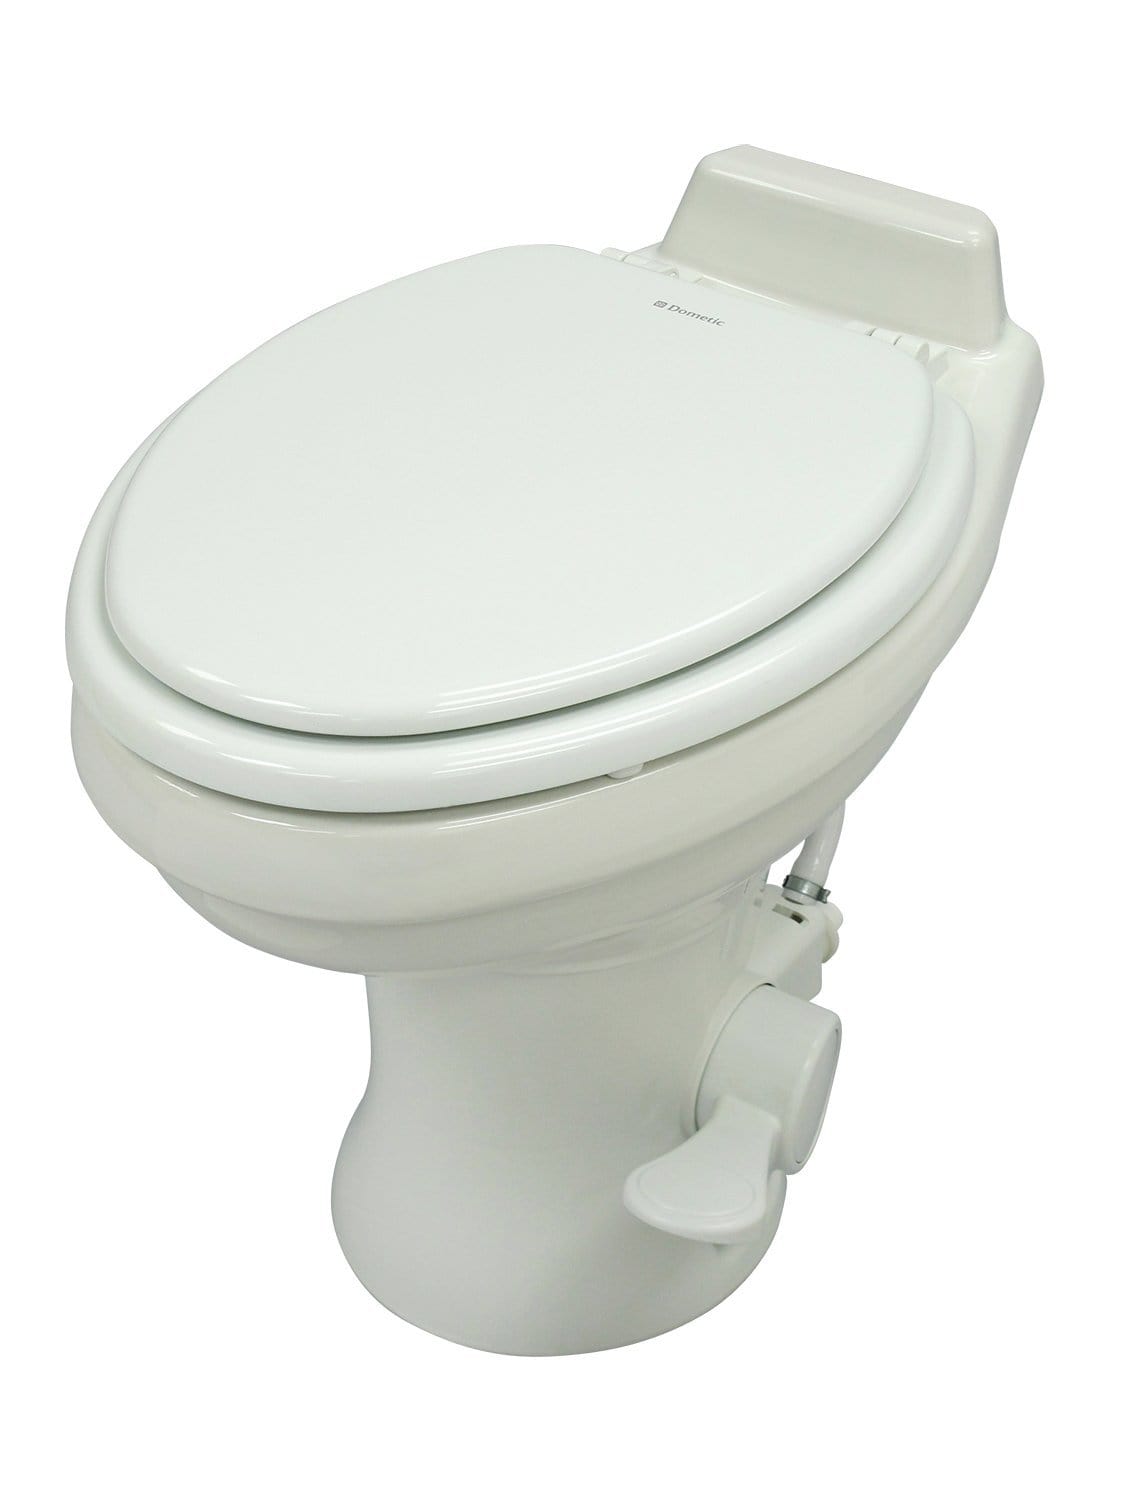 Dometic 302320181 320S White Standard Height Gravity Flush Ceramic Toilet With Hand Spray